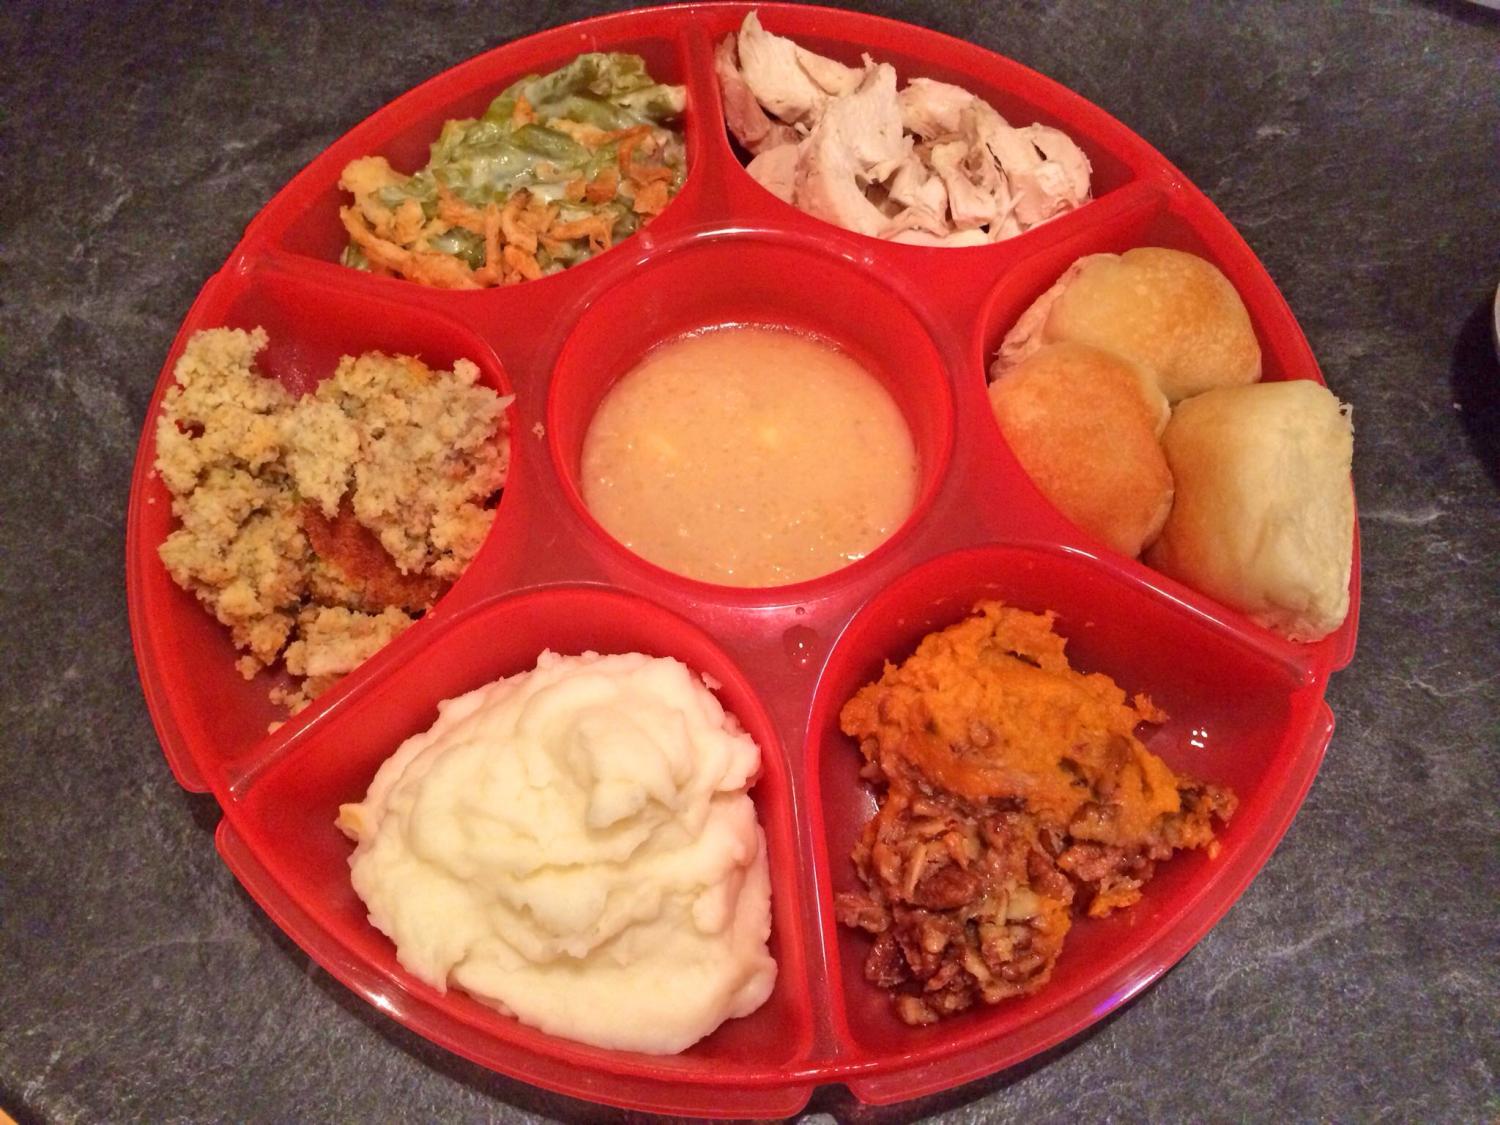 7 Section Divided Plate - The perfect plate for Thanksgiving Dinner